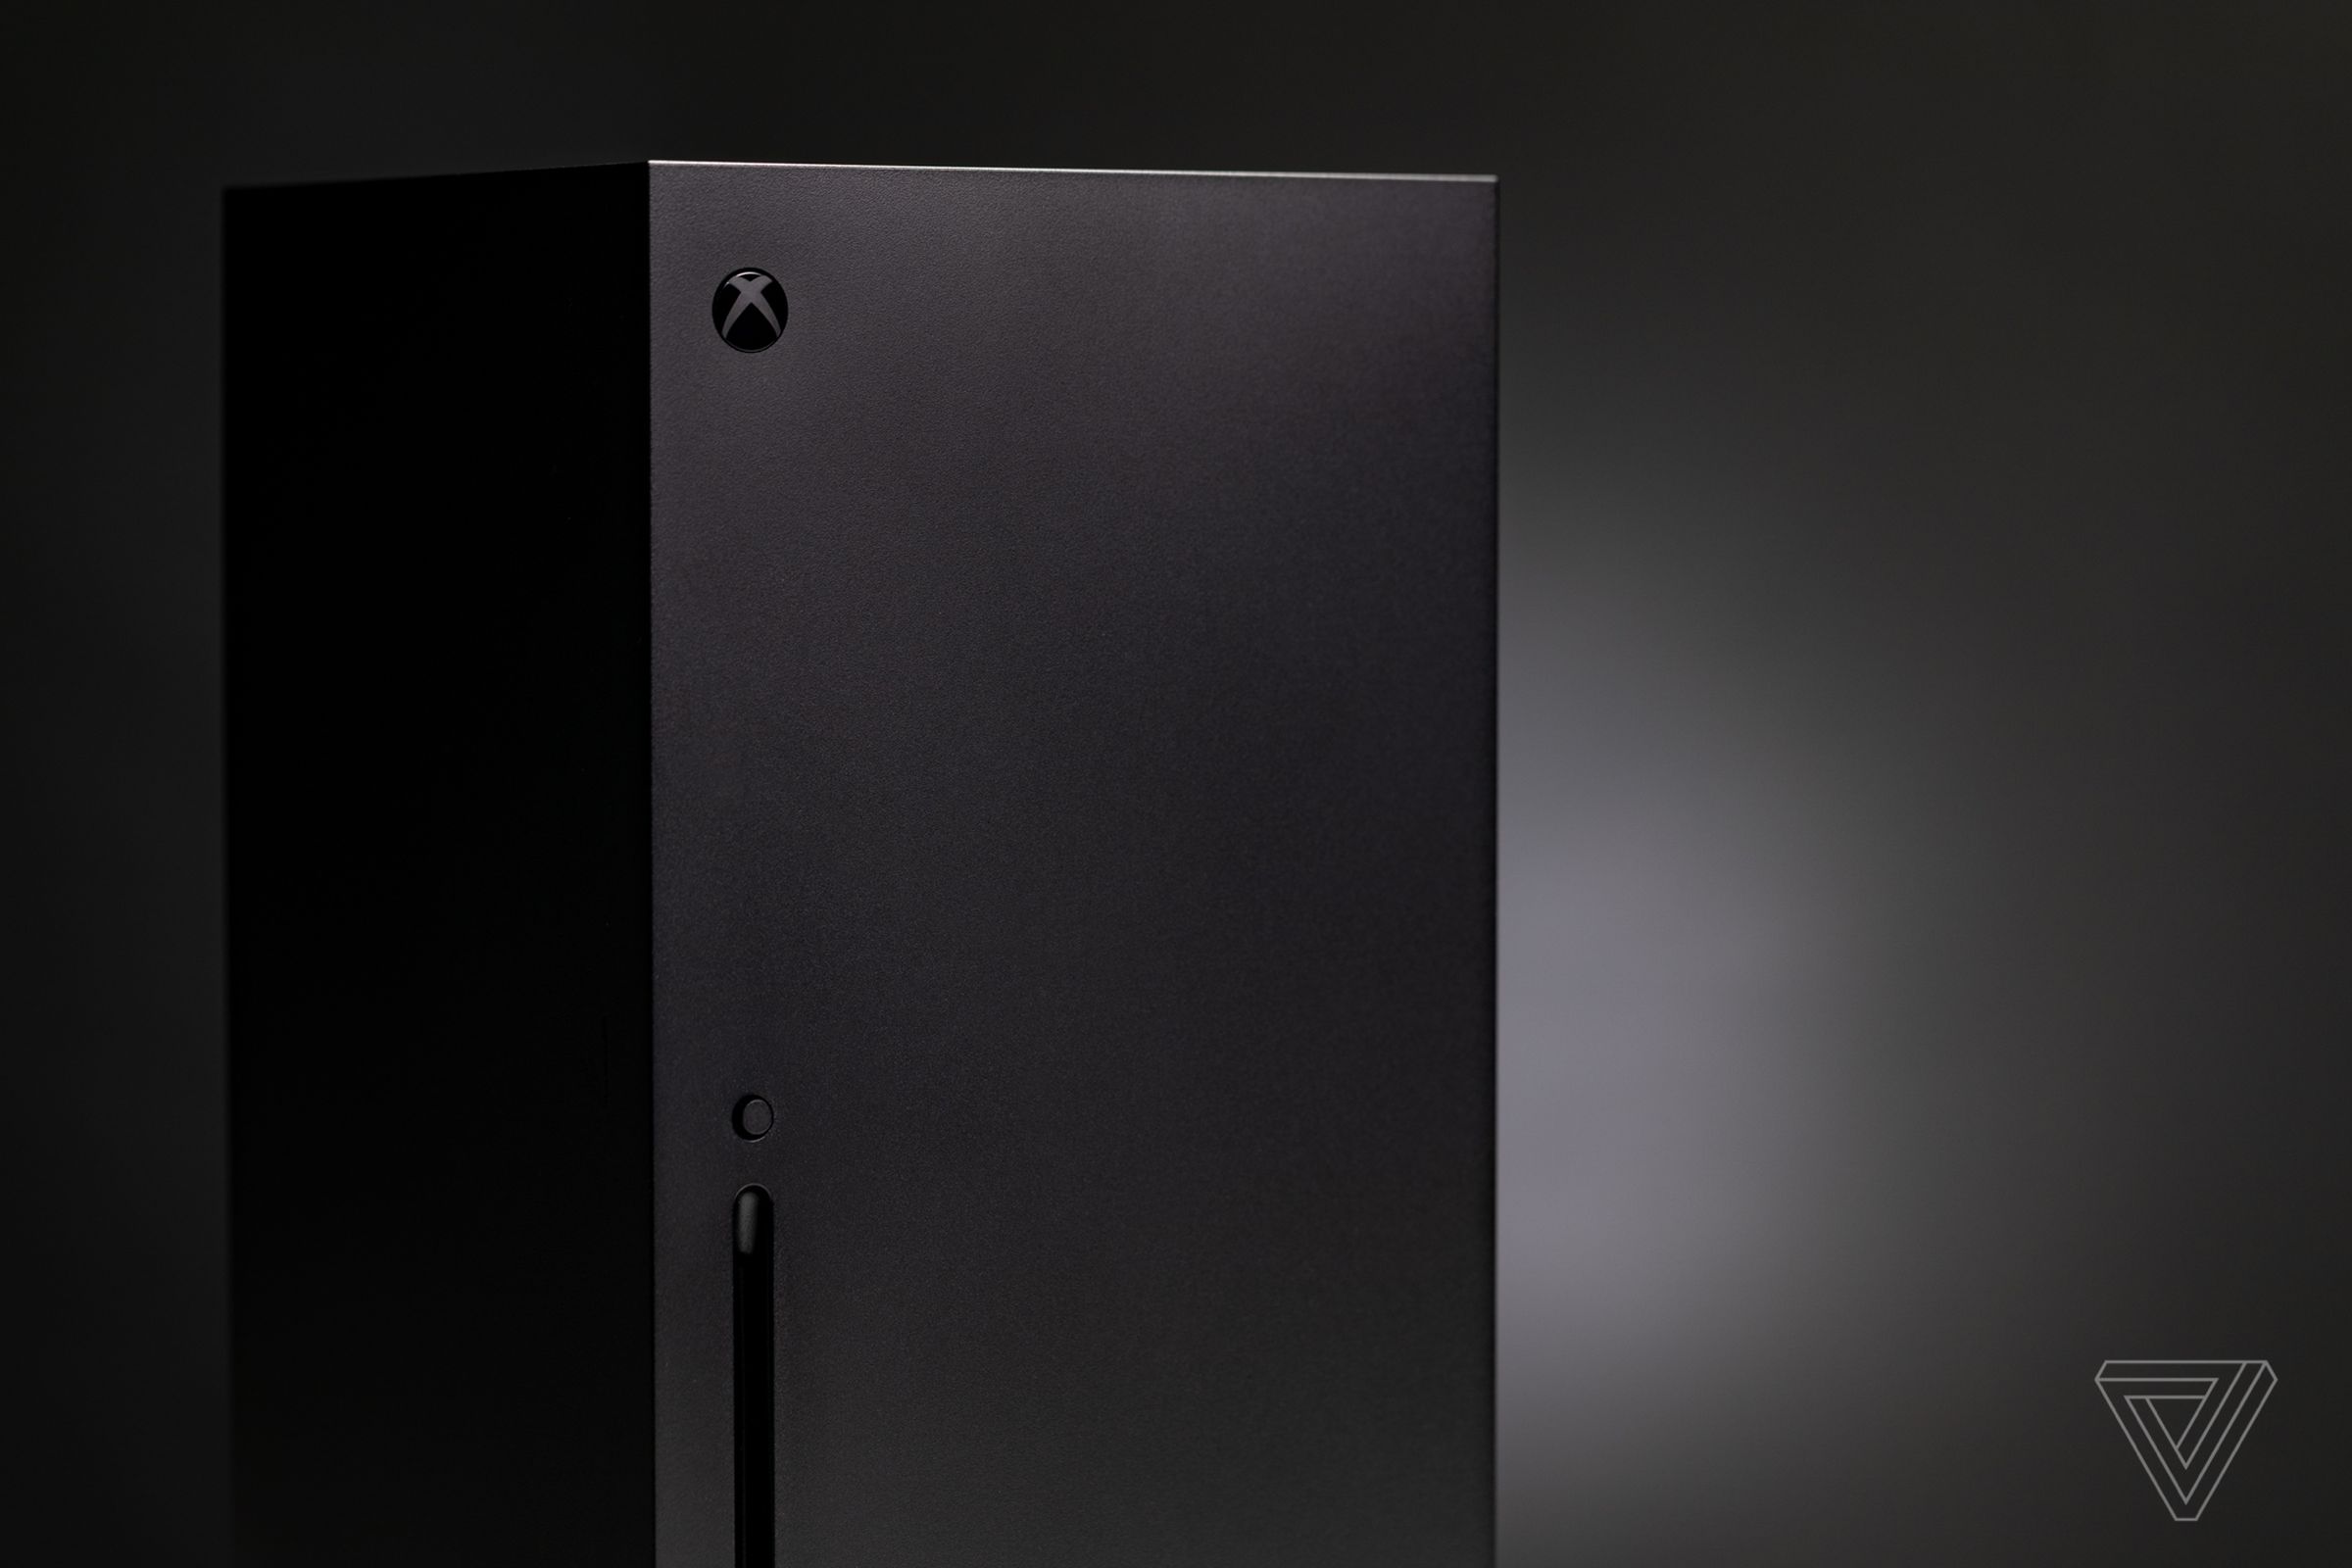 The Xbox Series X in front of a black background.